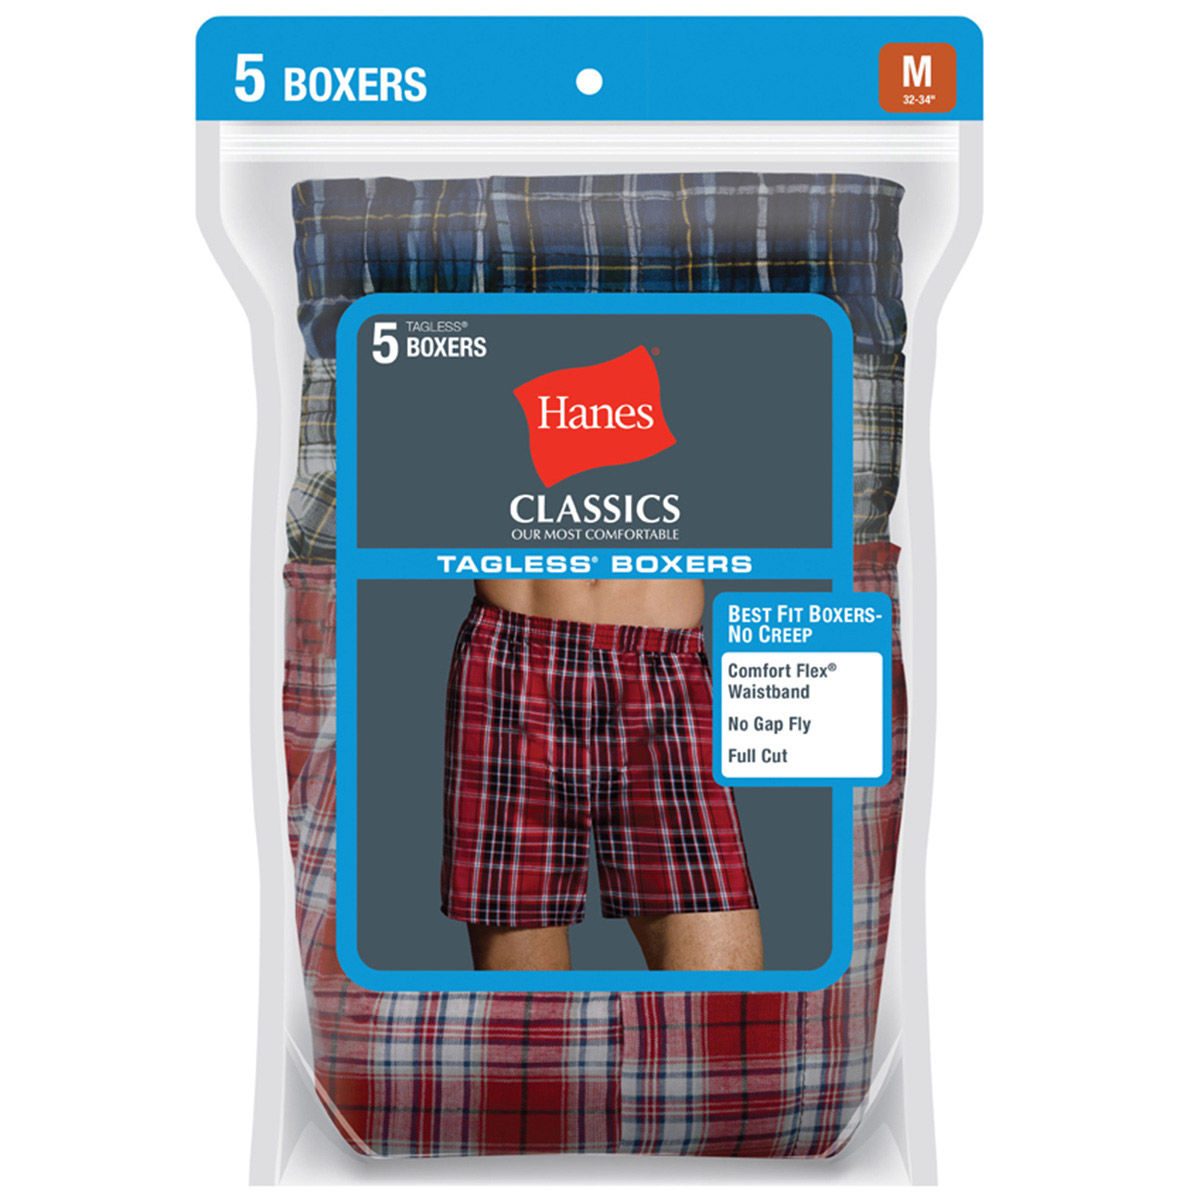 Hanes Men's Classics Tagless Boxers, 5-Pack, Various Patterns